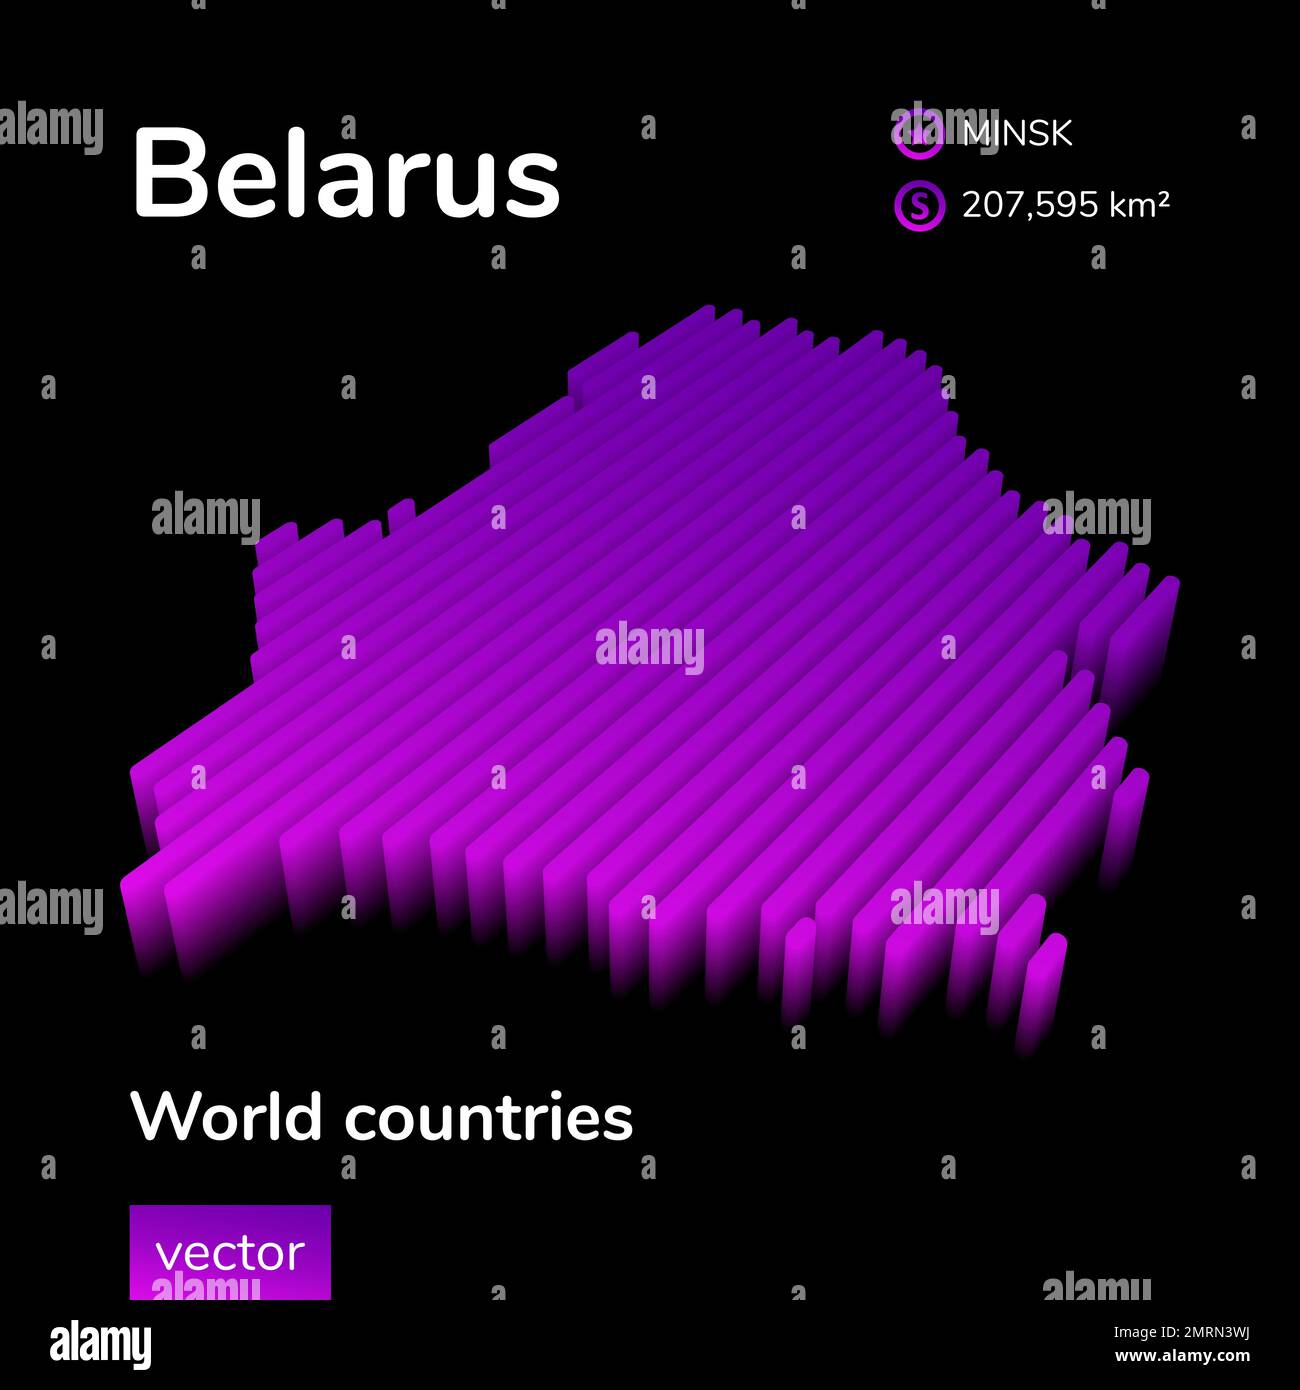 Belarus 3D map. Stylized neon digital isometric striped vector Map in violet, pink colors on the black background. Stock Vector